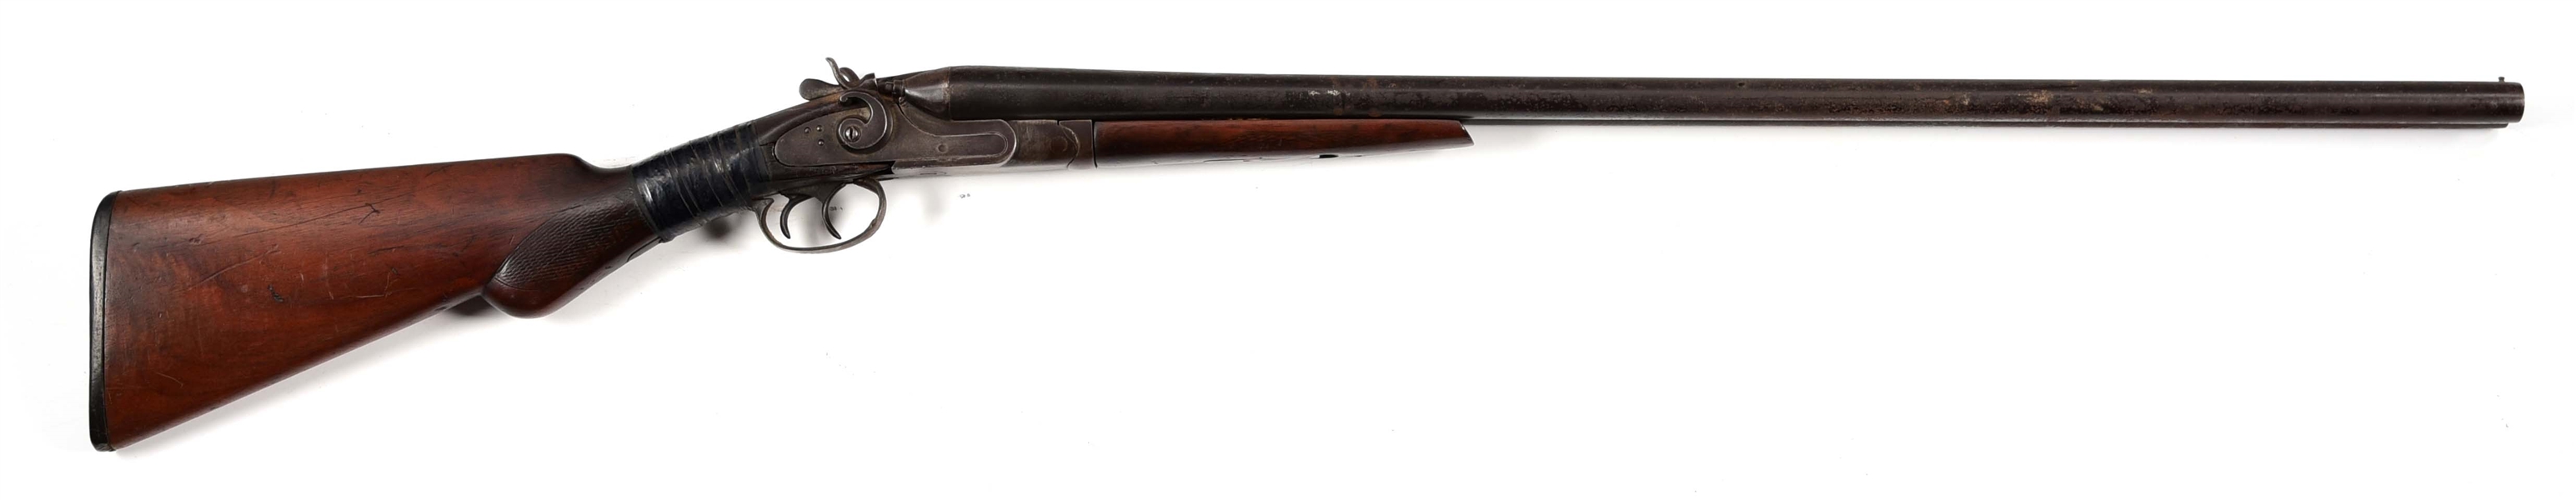 (A) CUMBERLAND ARMS CO. SIDE BY SIDE HAMMER SHOTGUN.